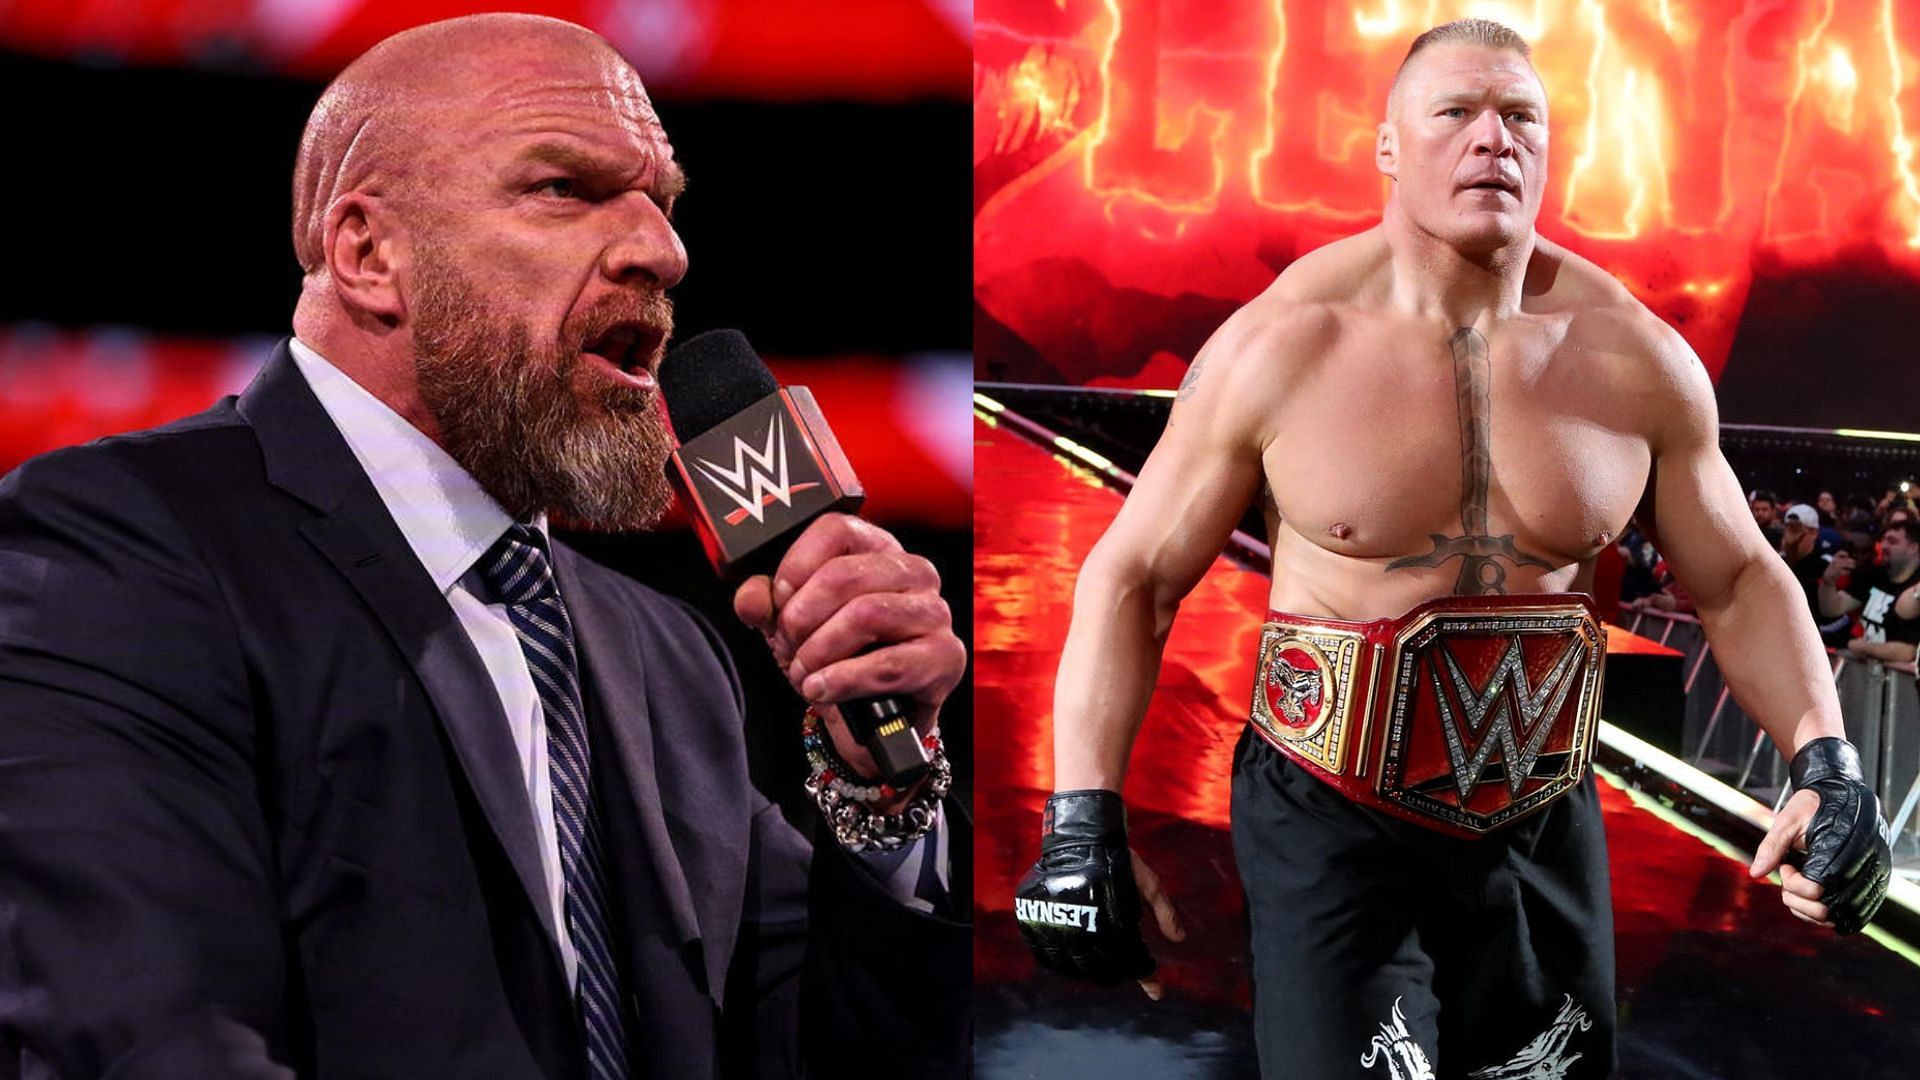 Triple H and Brock Lesnar have feuded in the past!